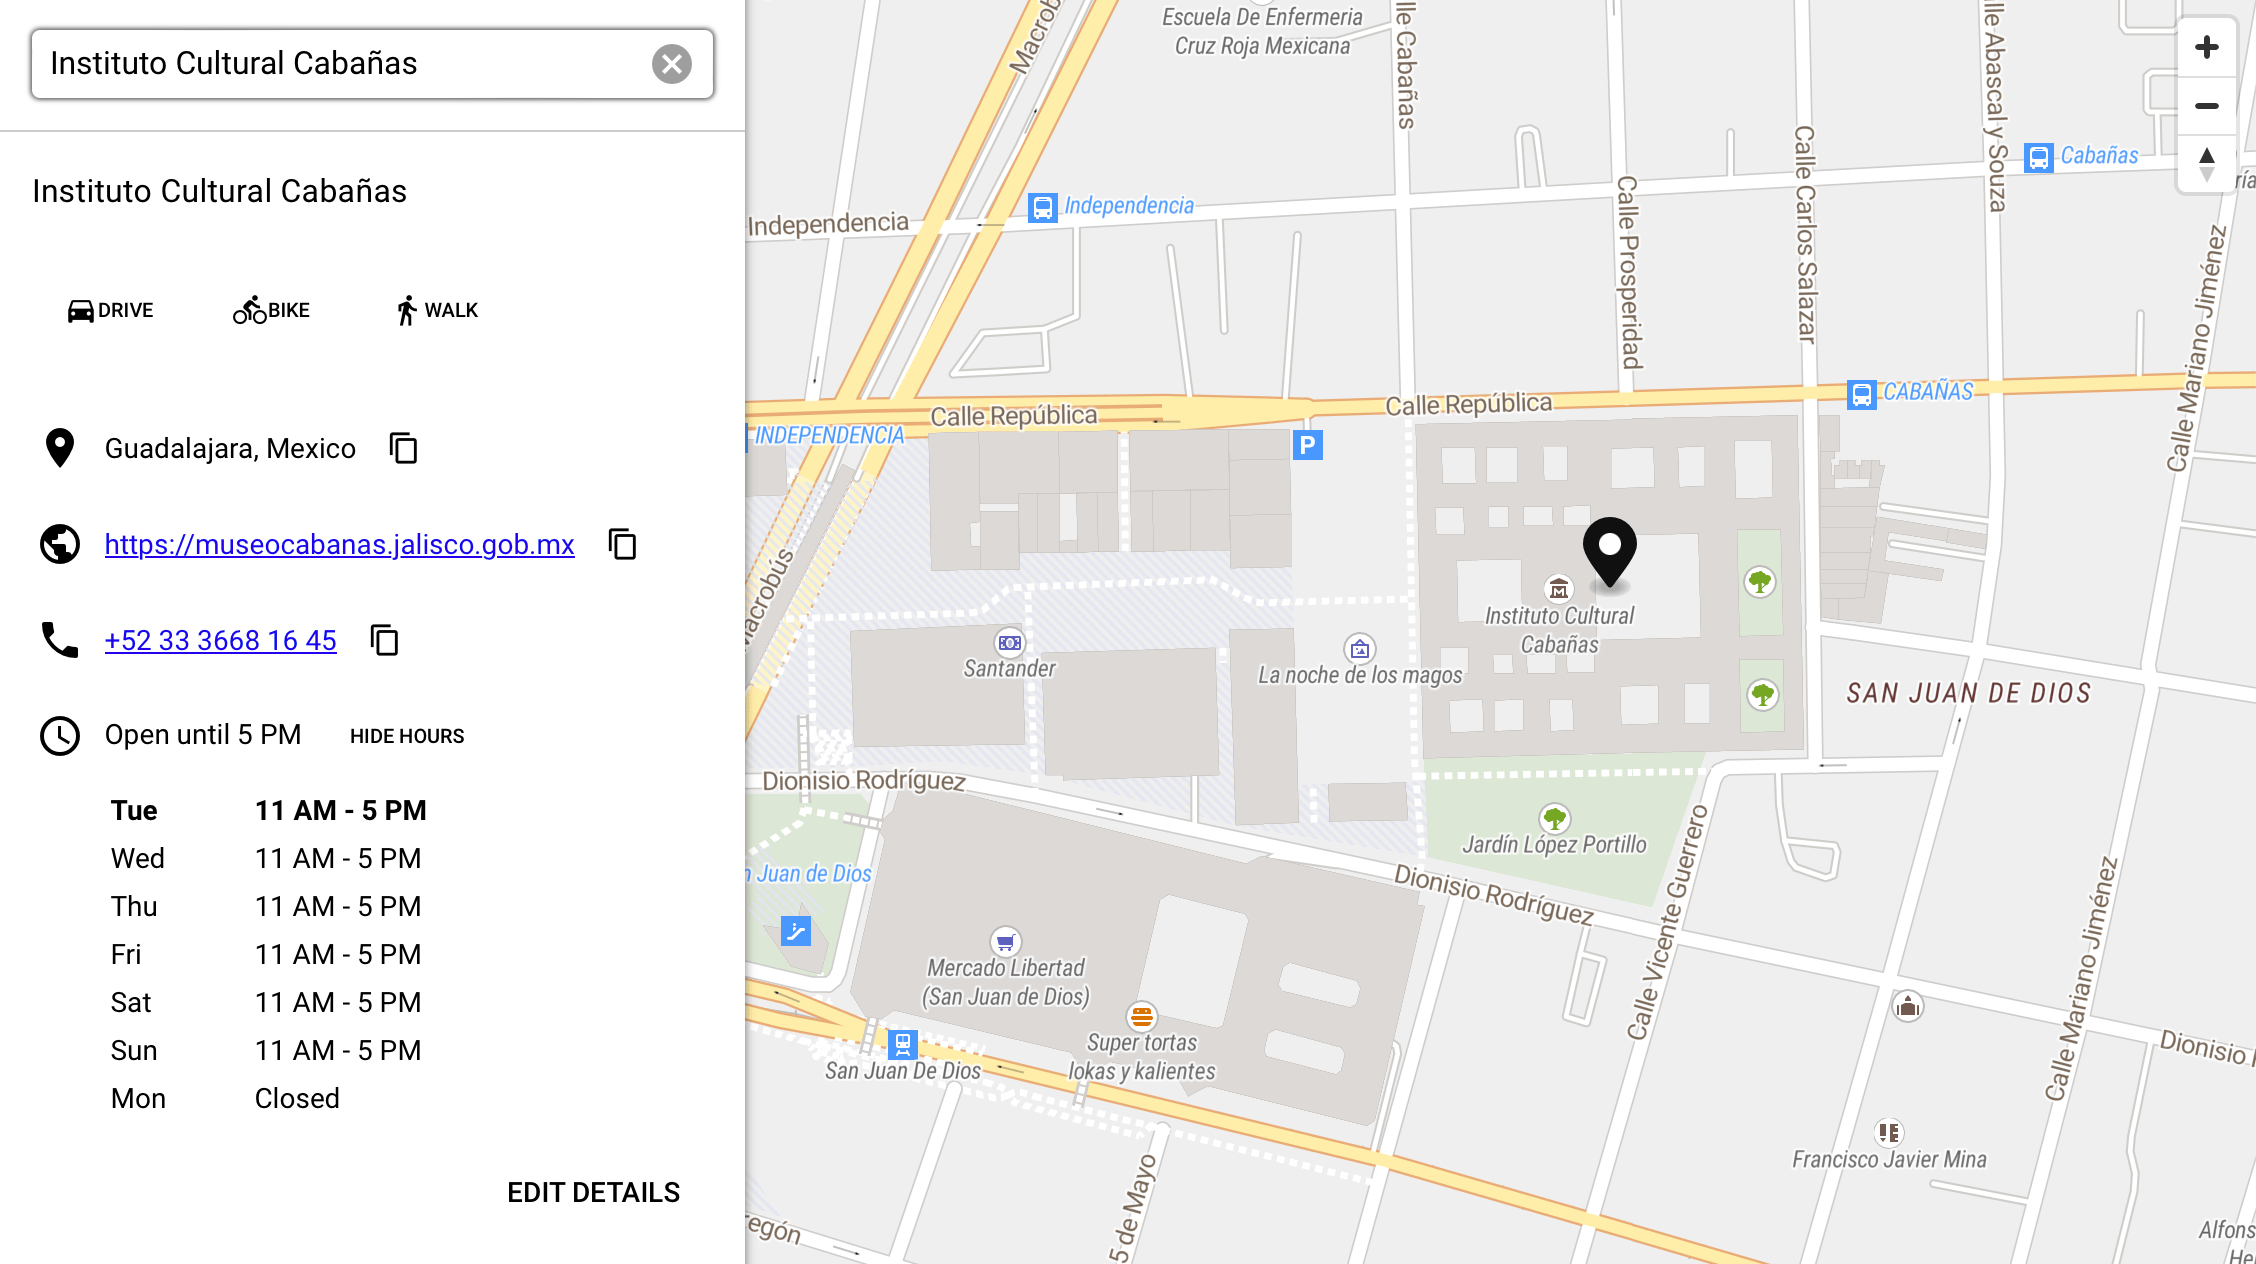 Screenshot of a map on maps.earth showing the Instituto Cultural Cabañas in Guadalajara Mexico, showing its website, phone number, and opening hours.